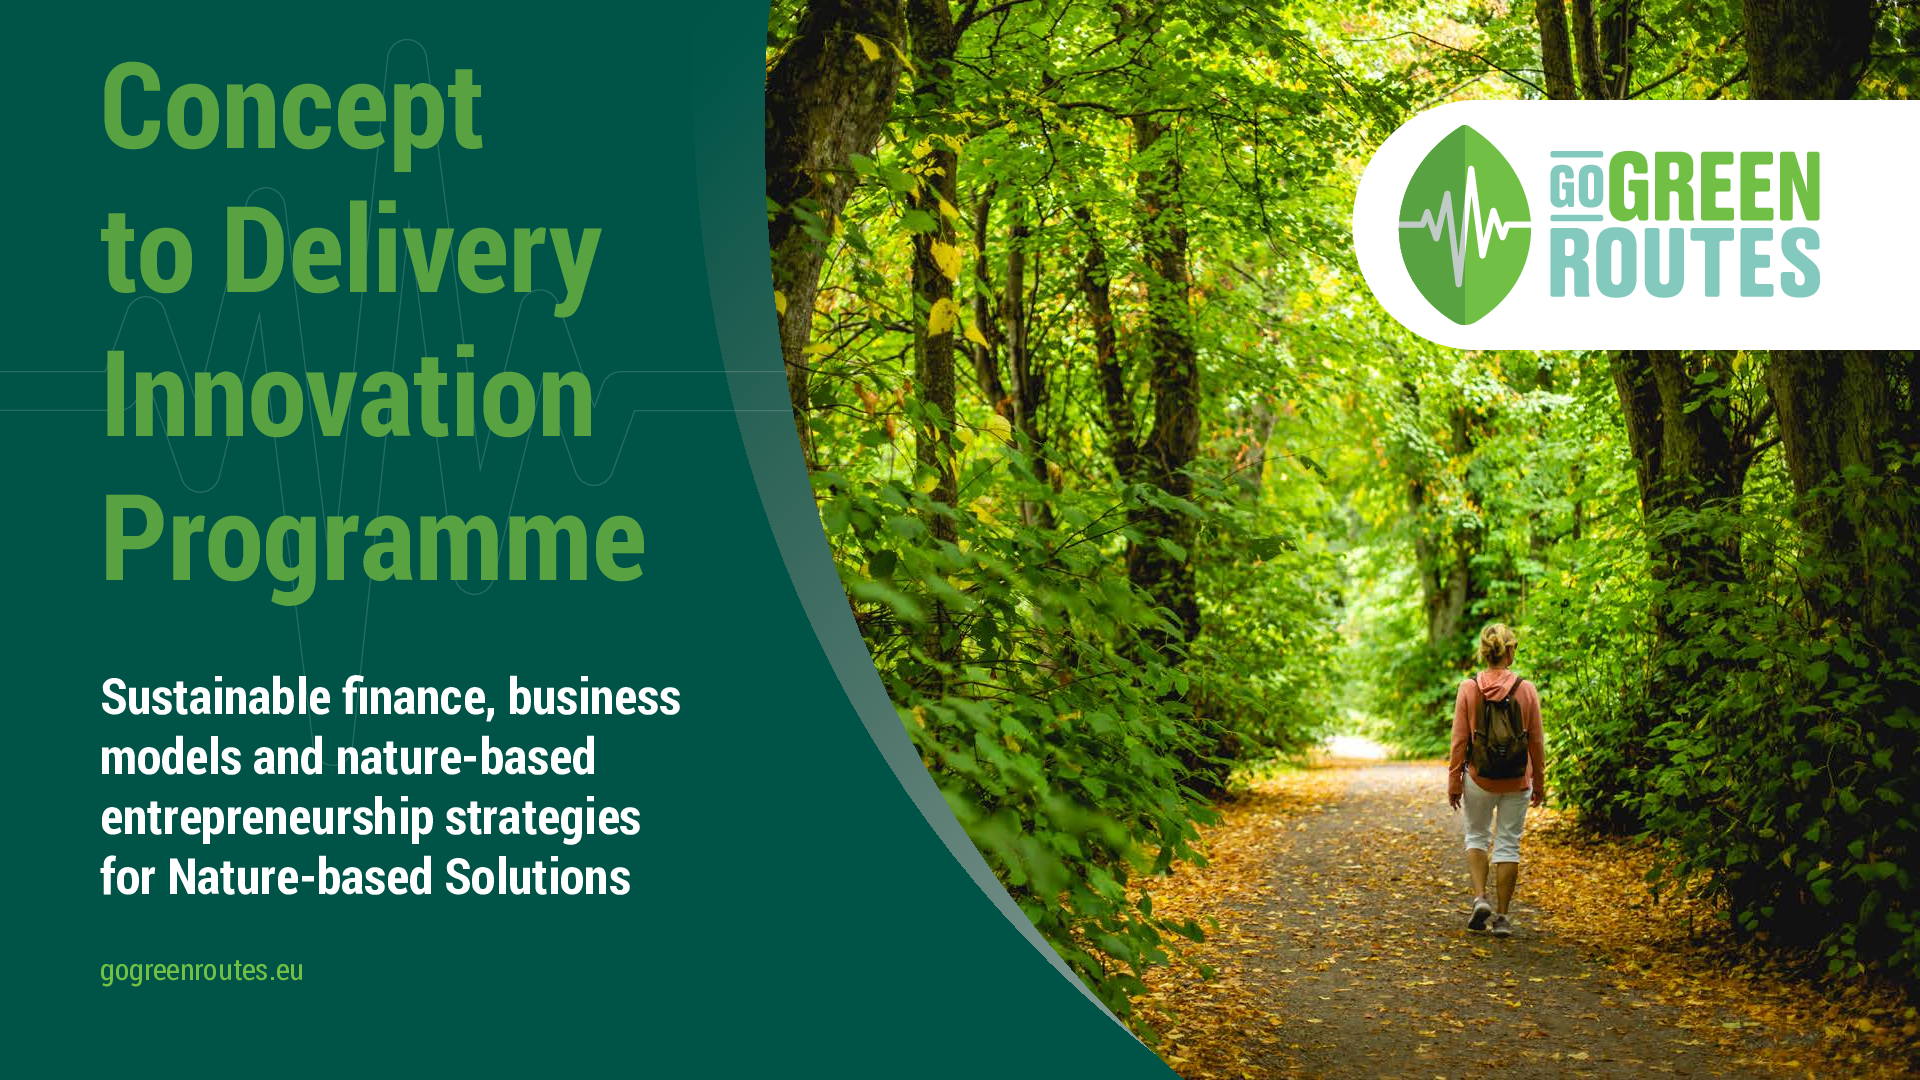 Concept to Delivery Innovation Programme - Sustainable finance, business models and nature-based entrepreneurship strategies for Nature-based Solutions